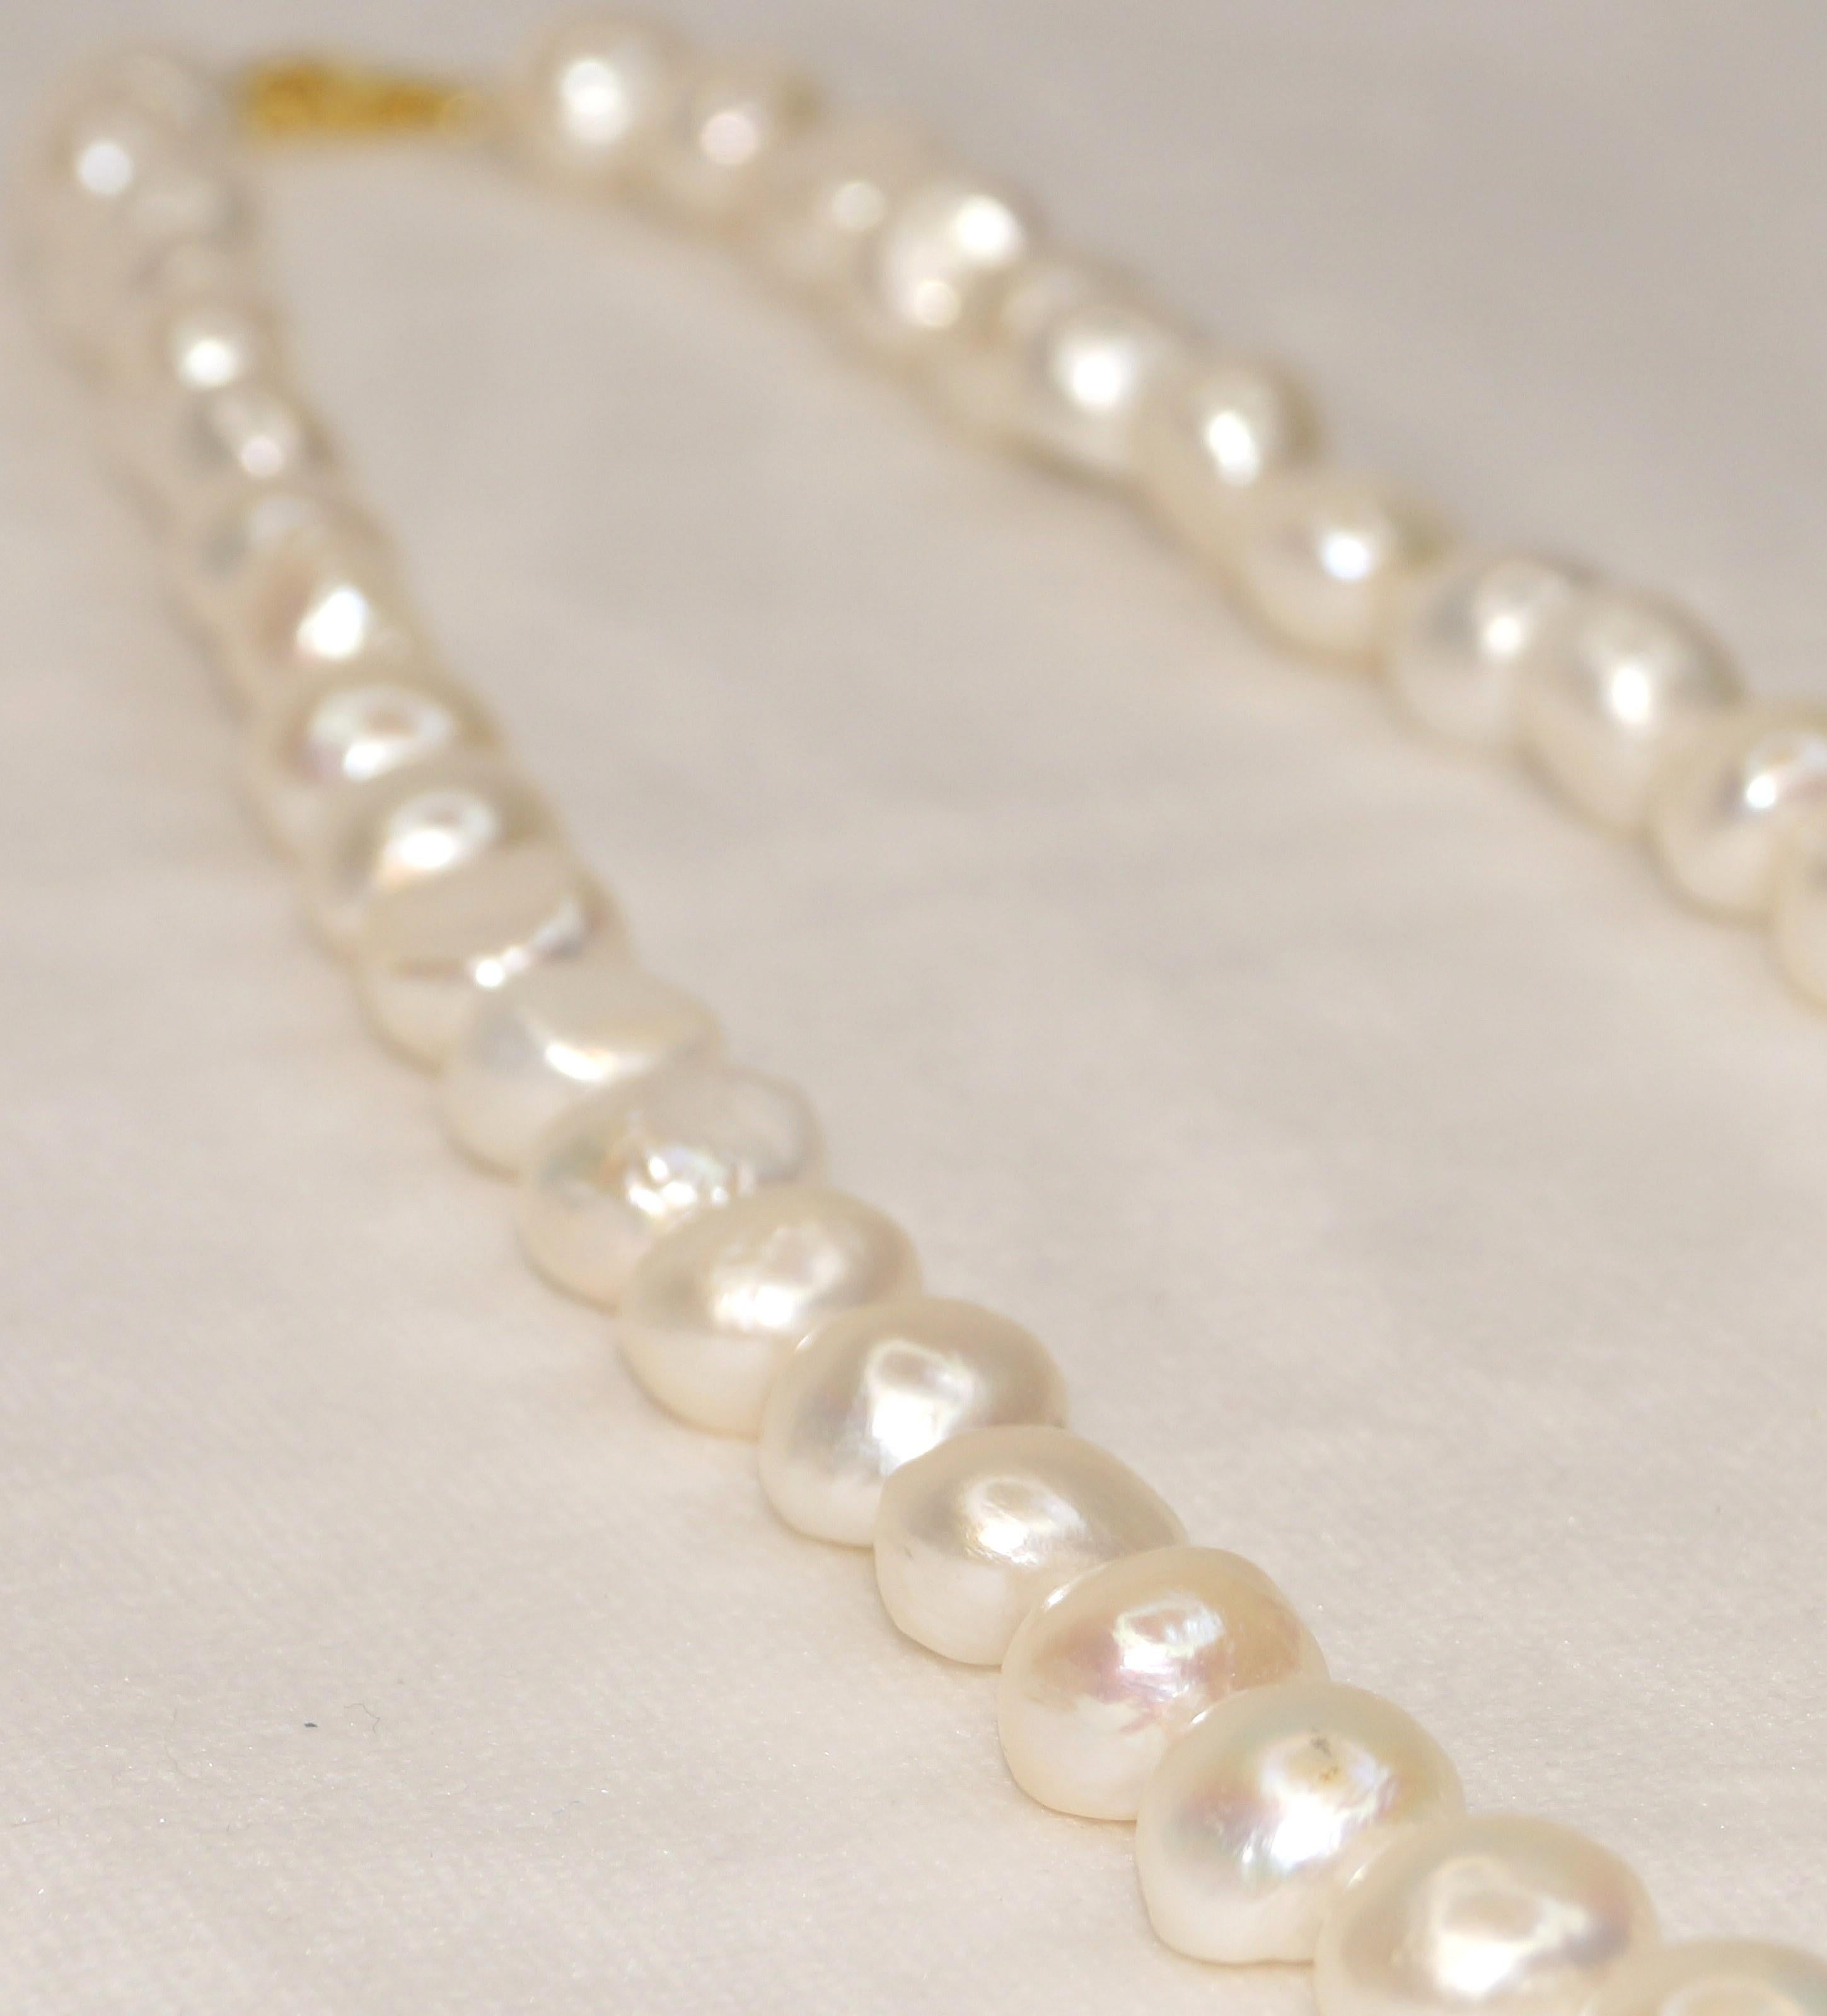 Details:
: 14k Yellow Gold Lock South Sea pearl beads Necklace.

: Item no- KM58/200/9691

:Pearl Size: 10mmx12mm (Approx.)

:Necklace length: 18